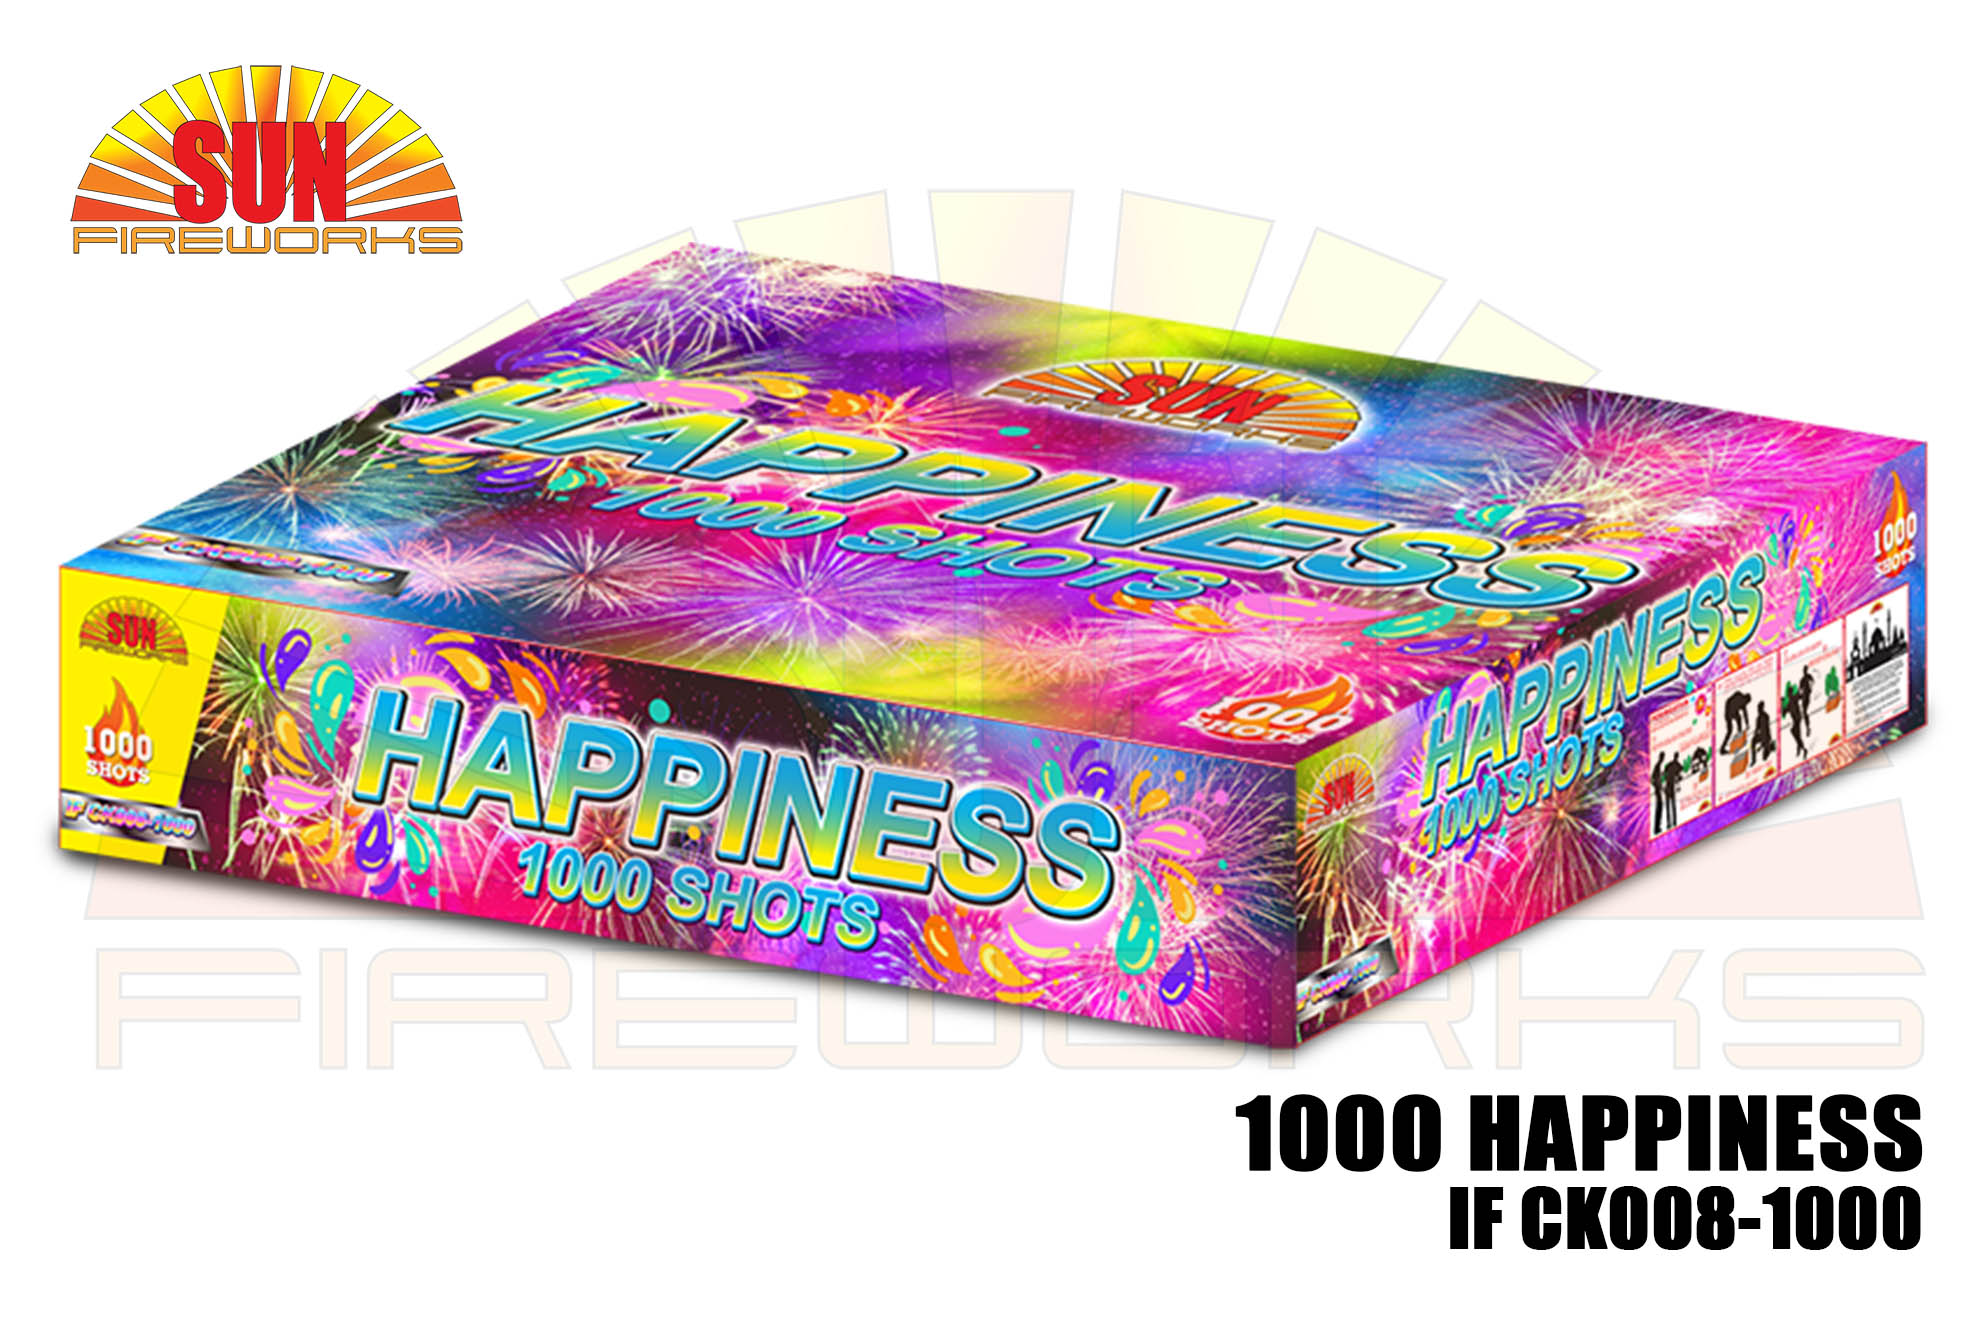 1000 HAPPINESS IF CK008-1000